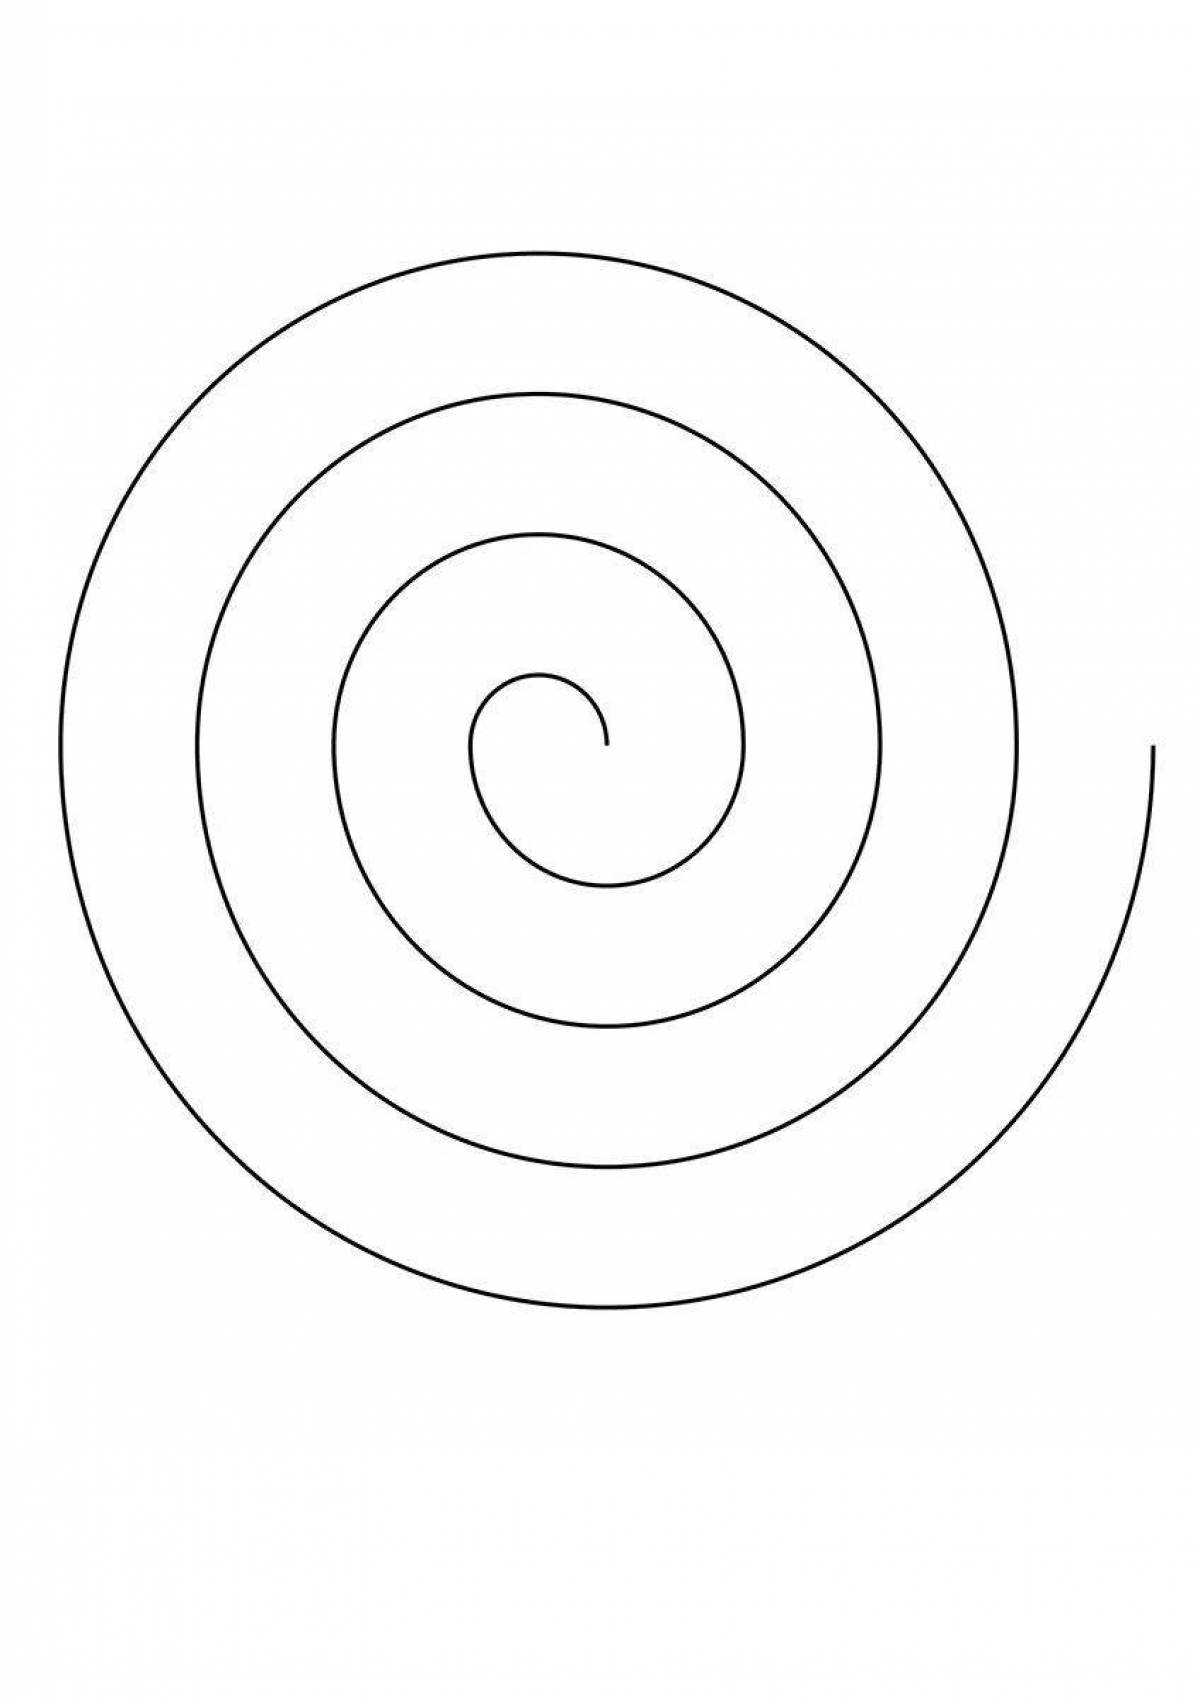 Have fun making your own spiral